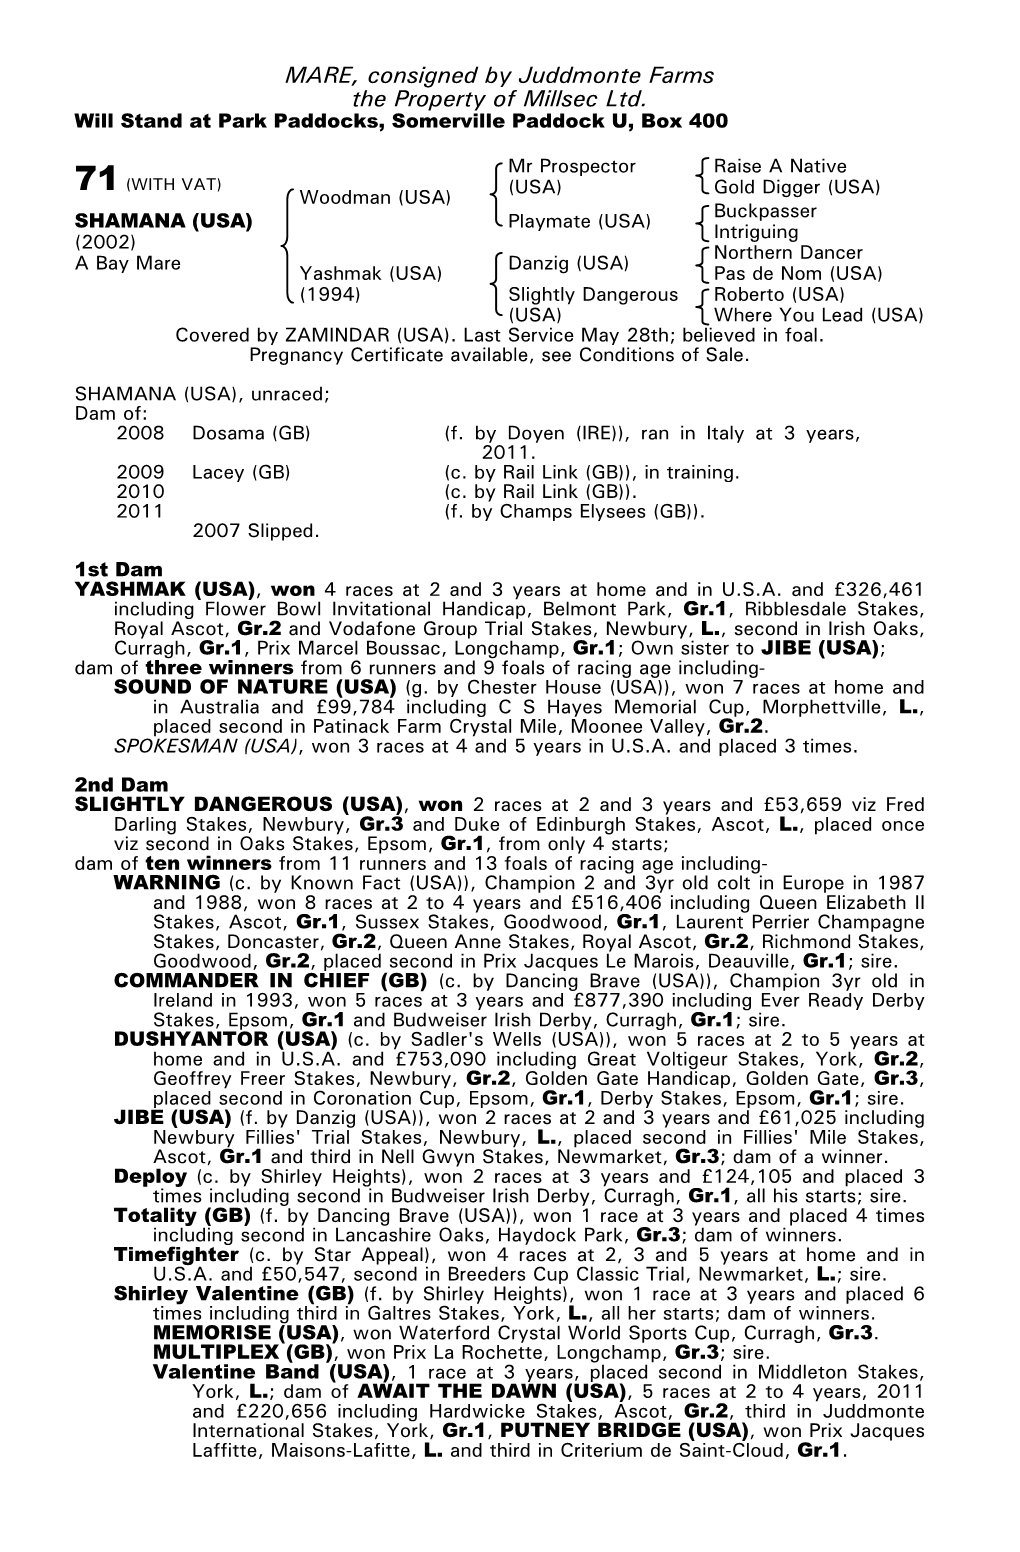 MARE, Consigned by Juddmonte Farms the Property of Millsec Ltd. Will Stand at Park Paddocks, Somerville Paddock U, Box 400